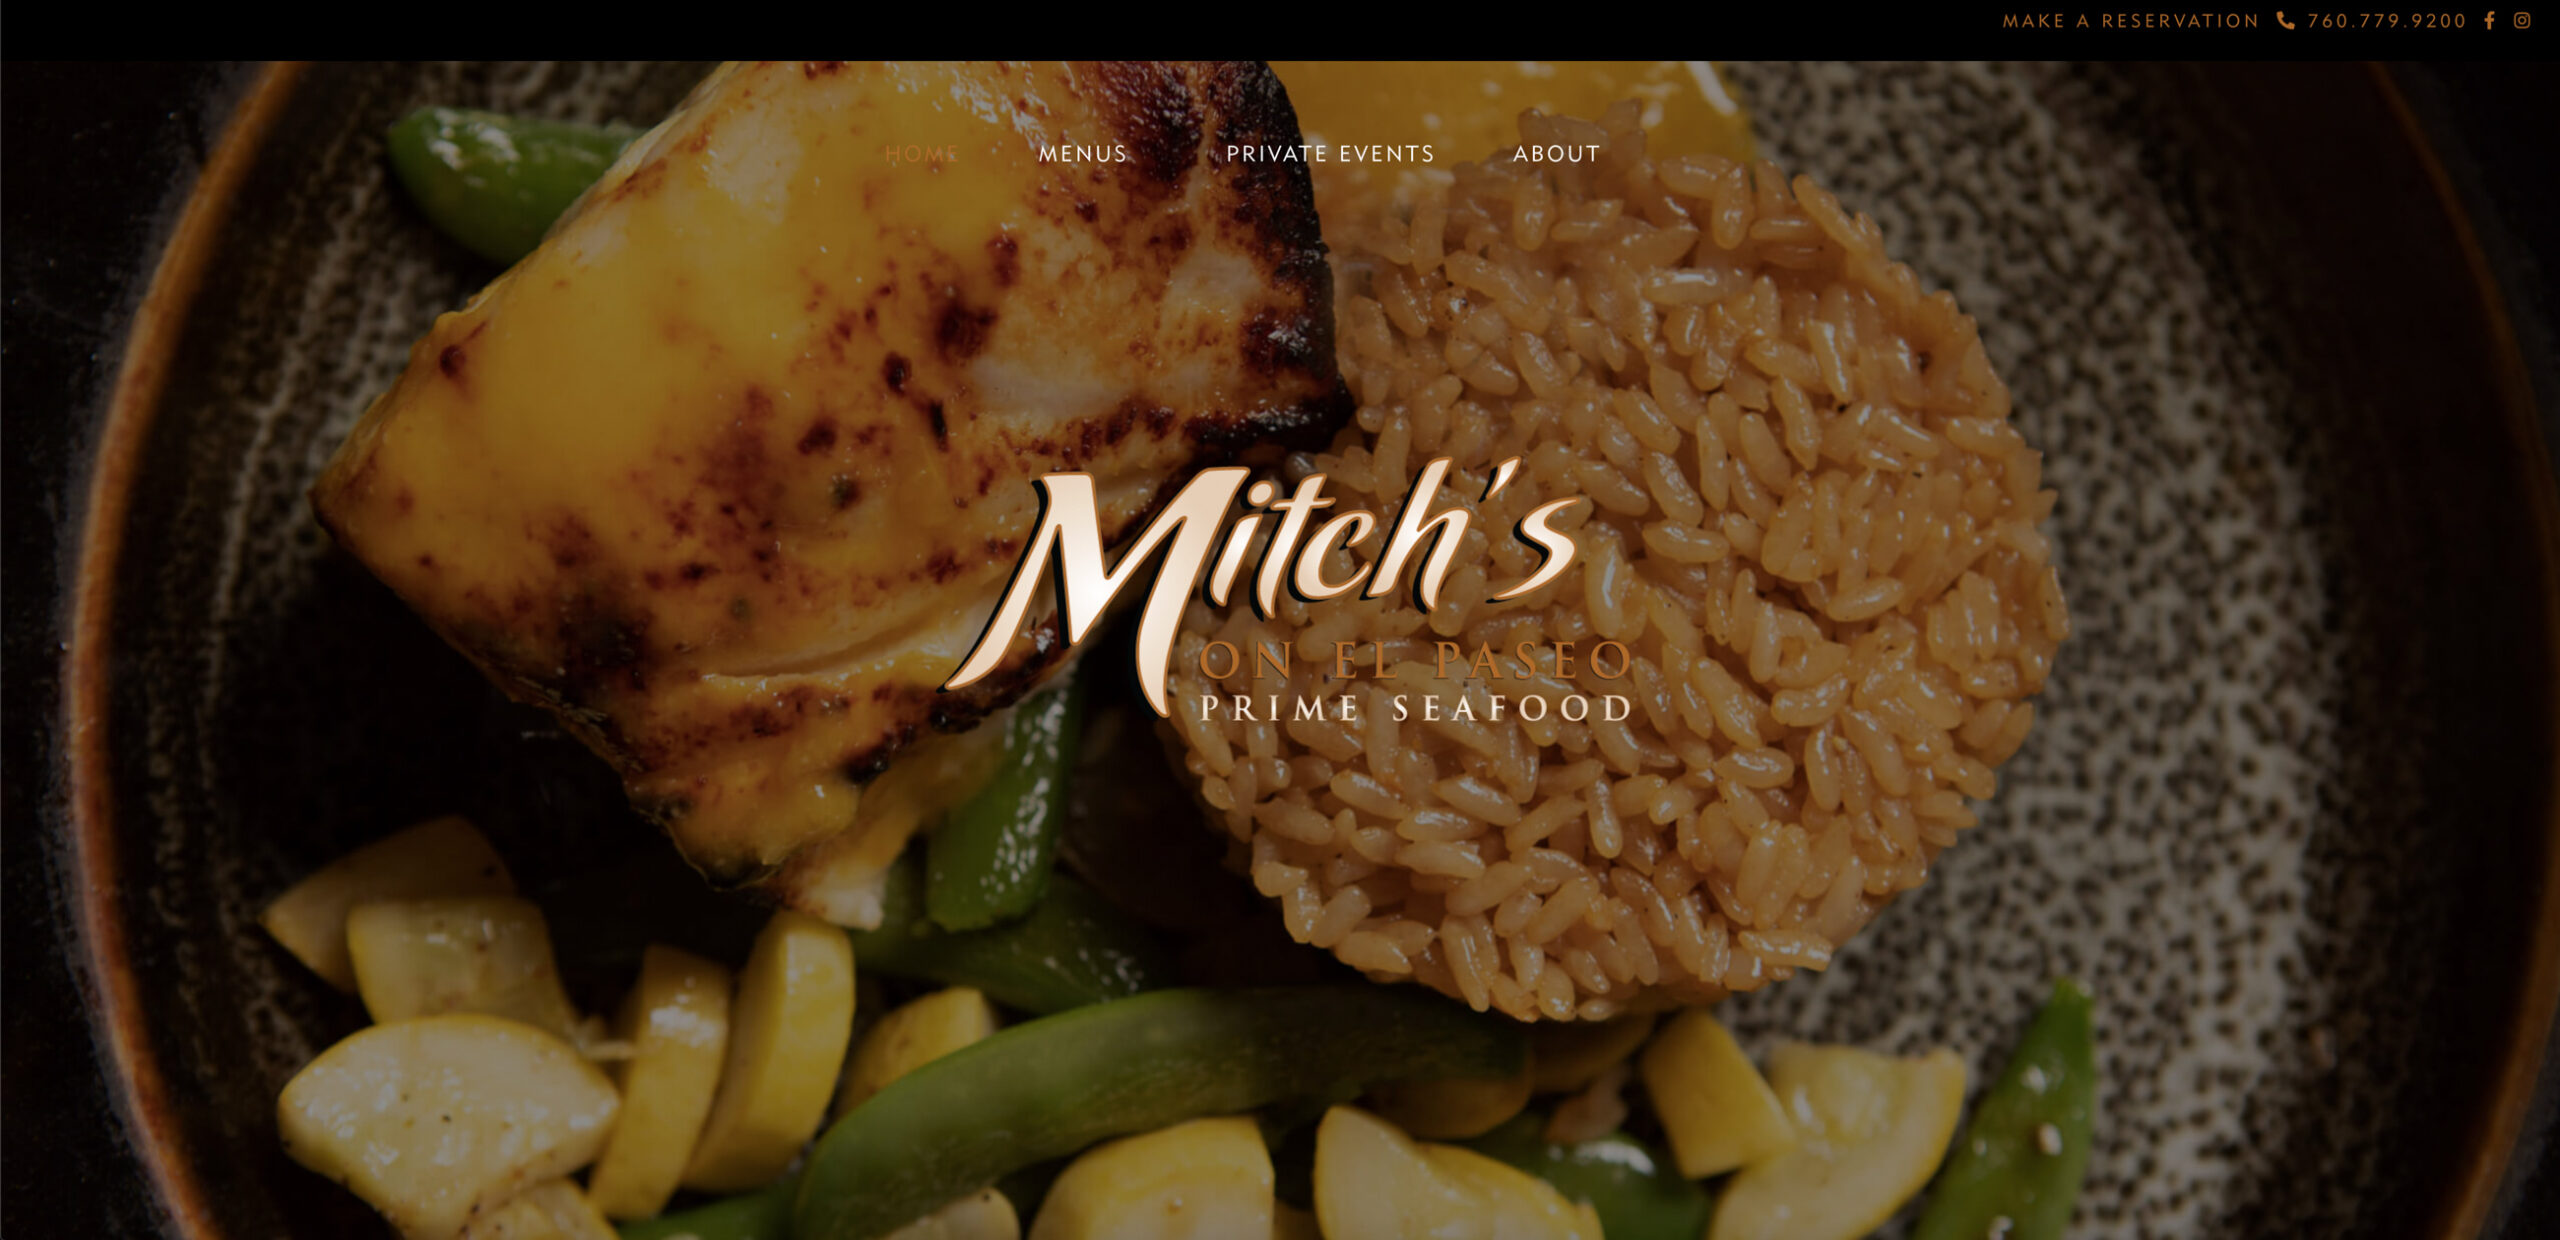 custom website design by kaminsky productions for mitch's on el paseo in palm desert